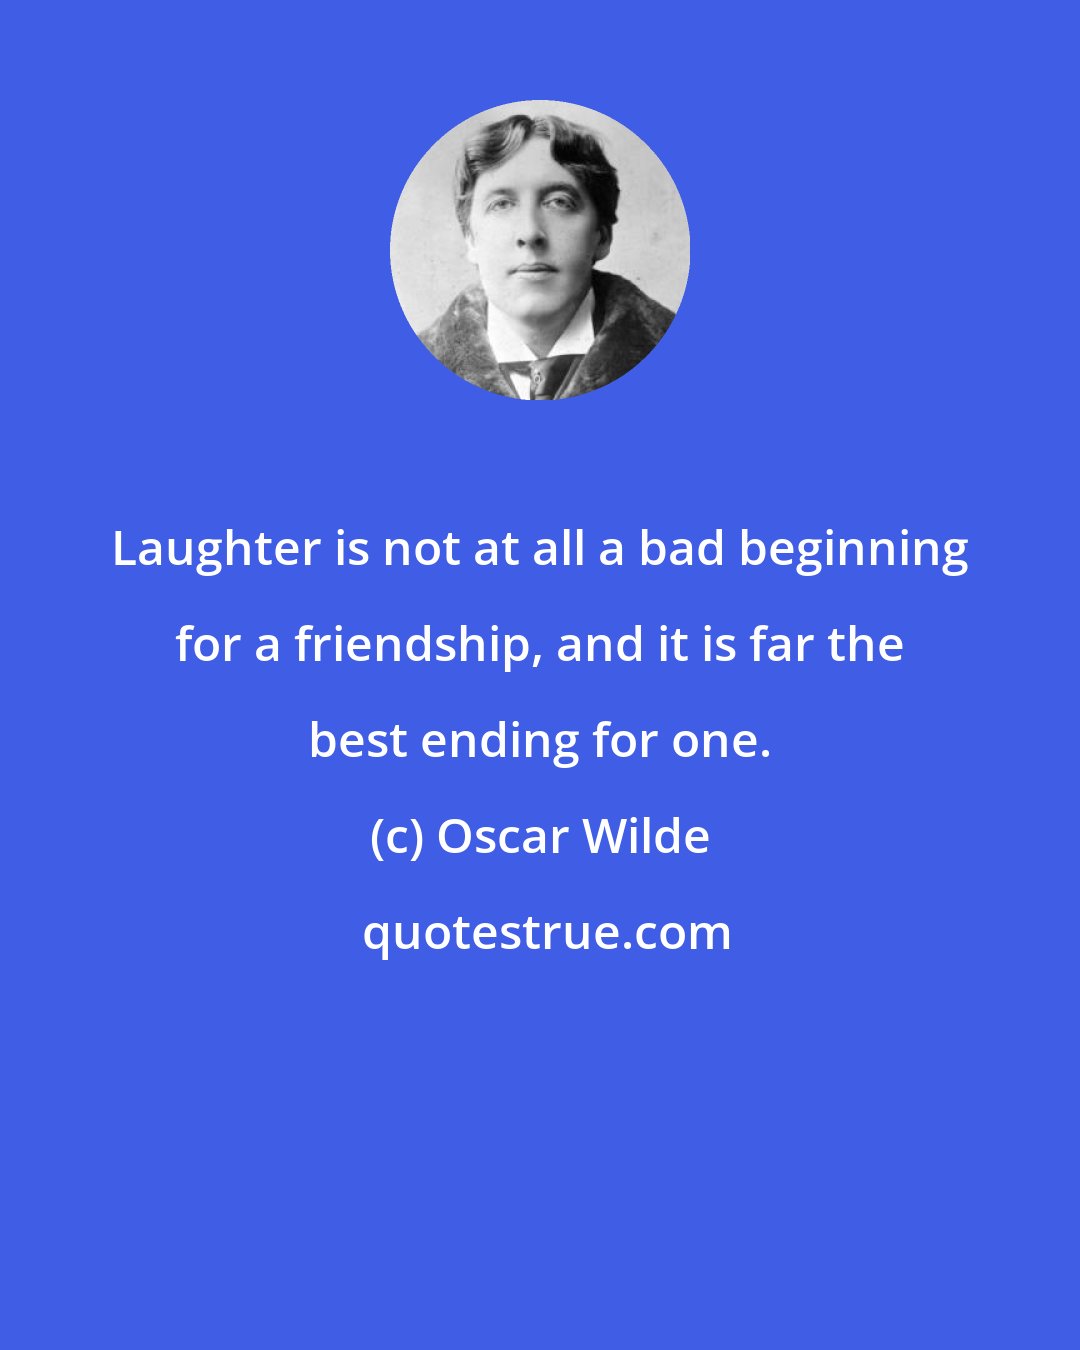 Oscar Wilde: Laughter is not at all a bad beginning for a friendship, and it is far the best ending for one.